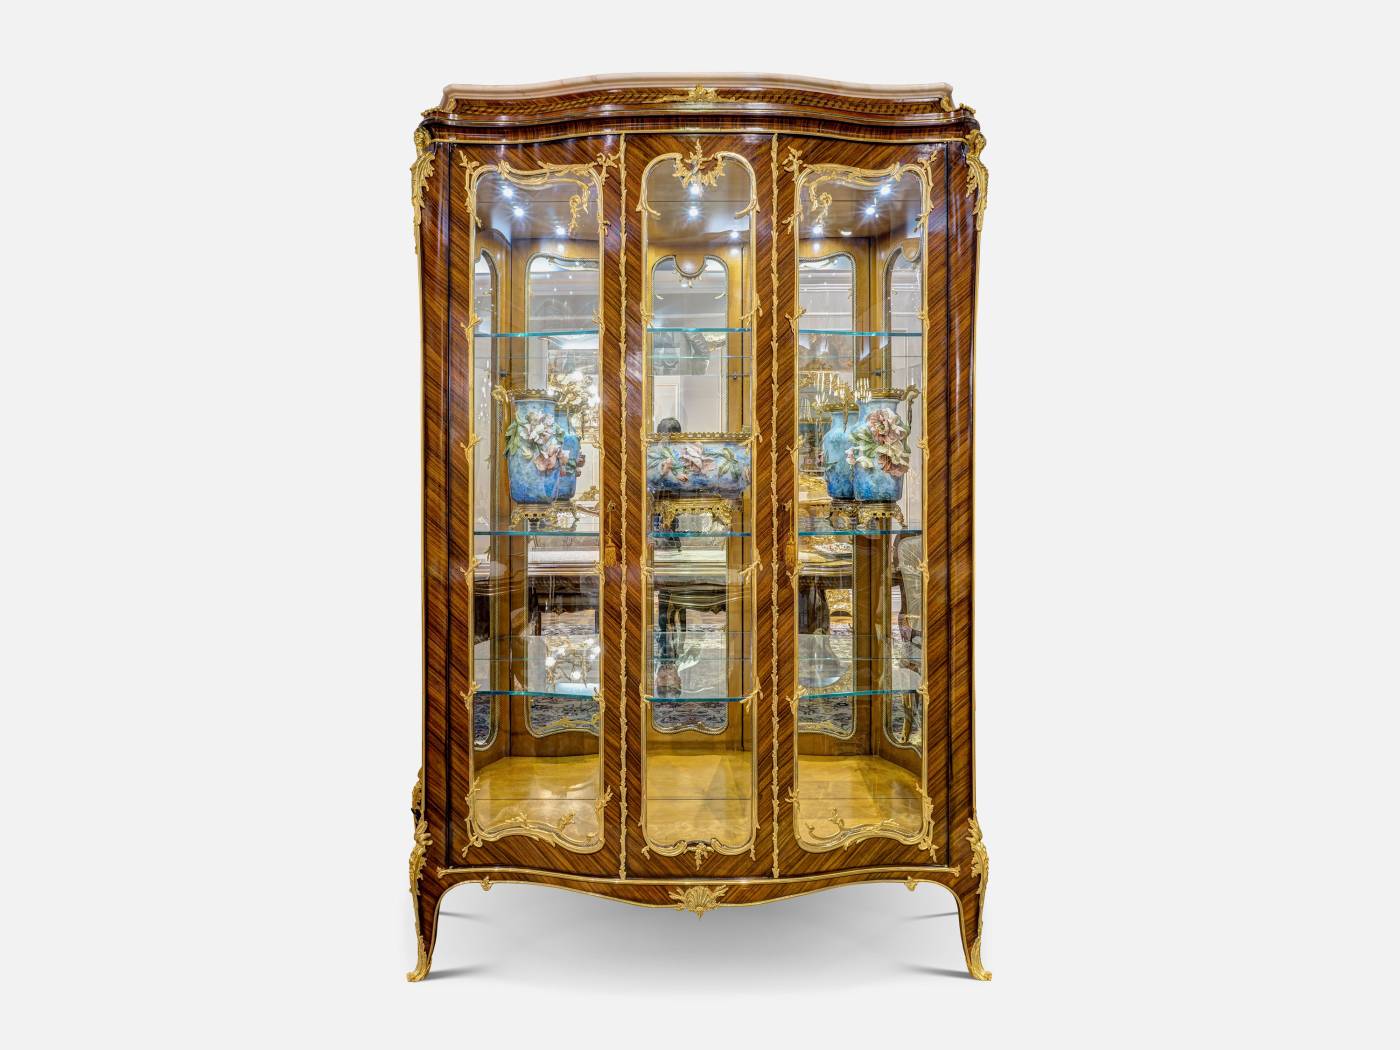 ART. 1094-4 – The elegance of luxury classic Showcases and Bookcases made in Italy by C.G. Capelletti.